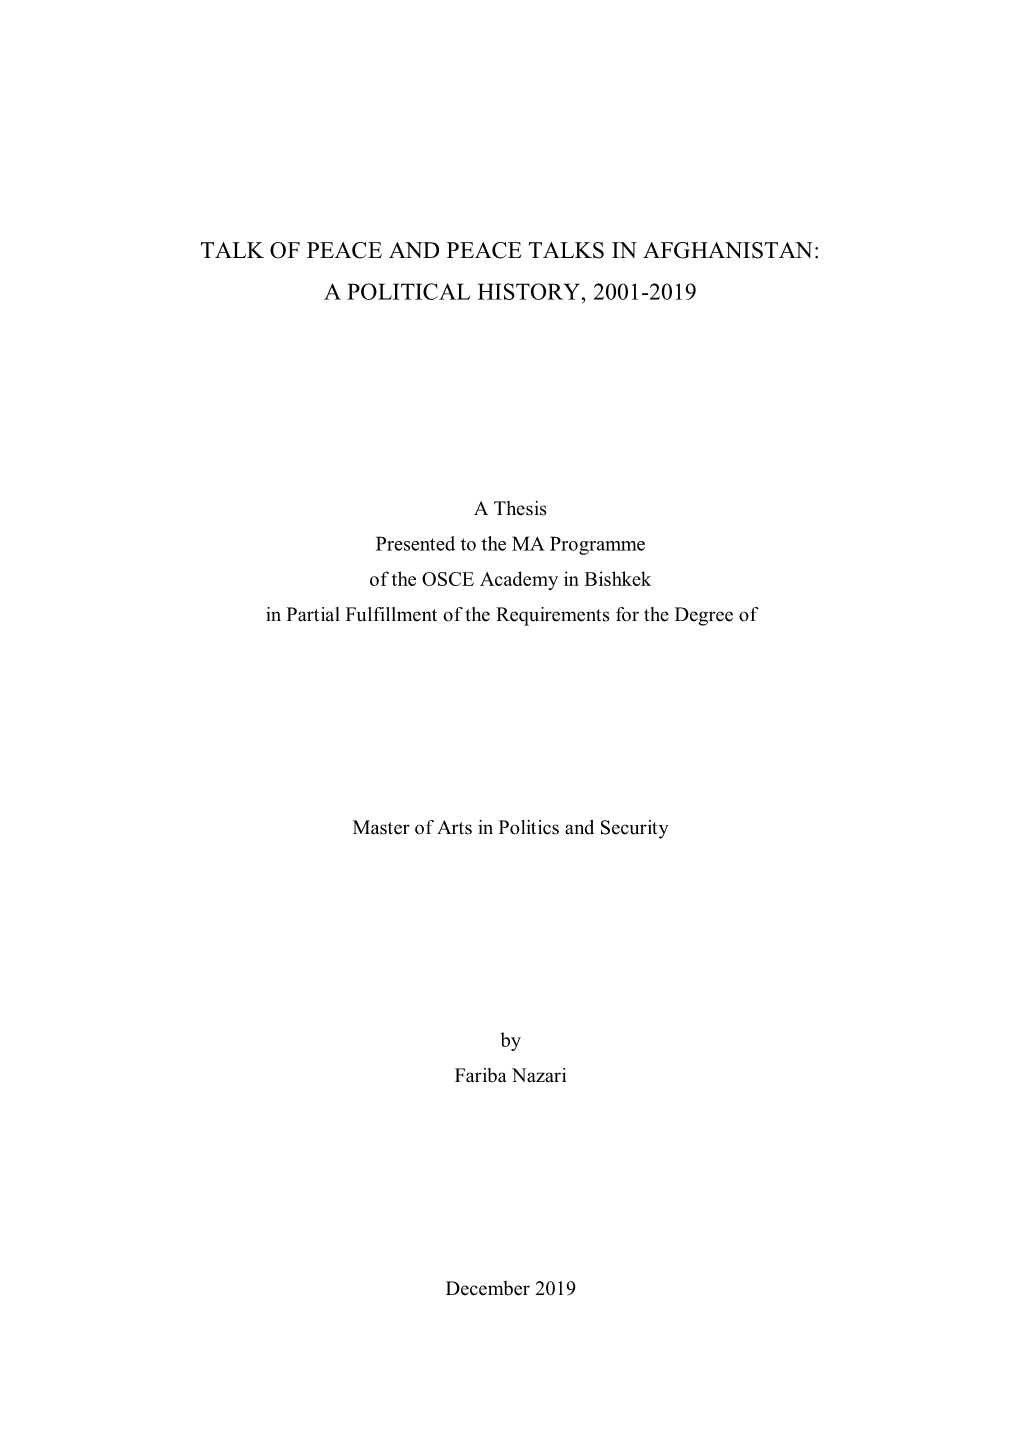 Talk of Peace and Peace Talks in Afghanistan: a Political History, 2001-2019